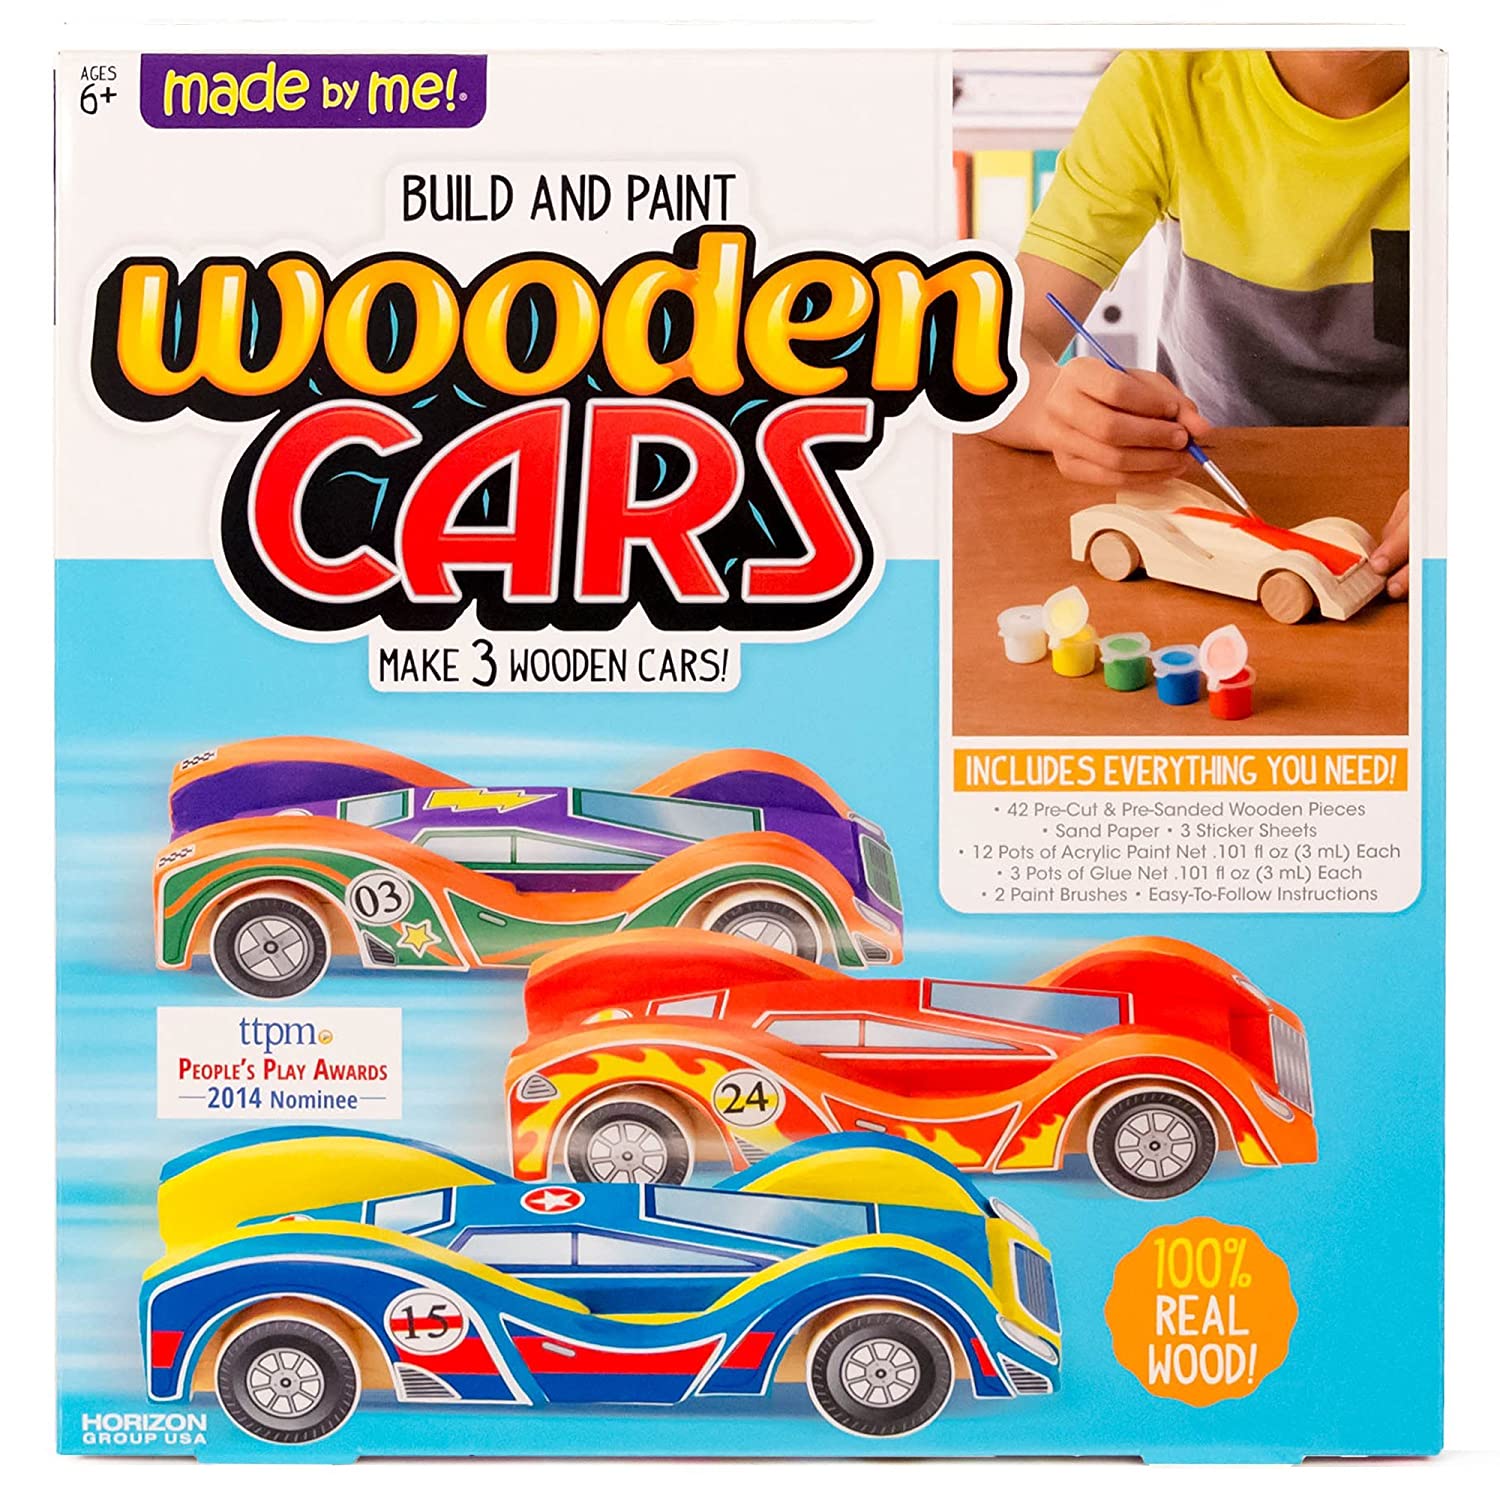 Made By Me Build & Paint Your Own Wooden Cars by Horizon Group Usa, DIY Wood Craft Kit